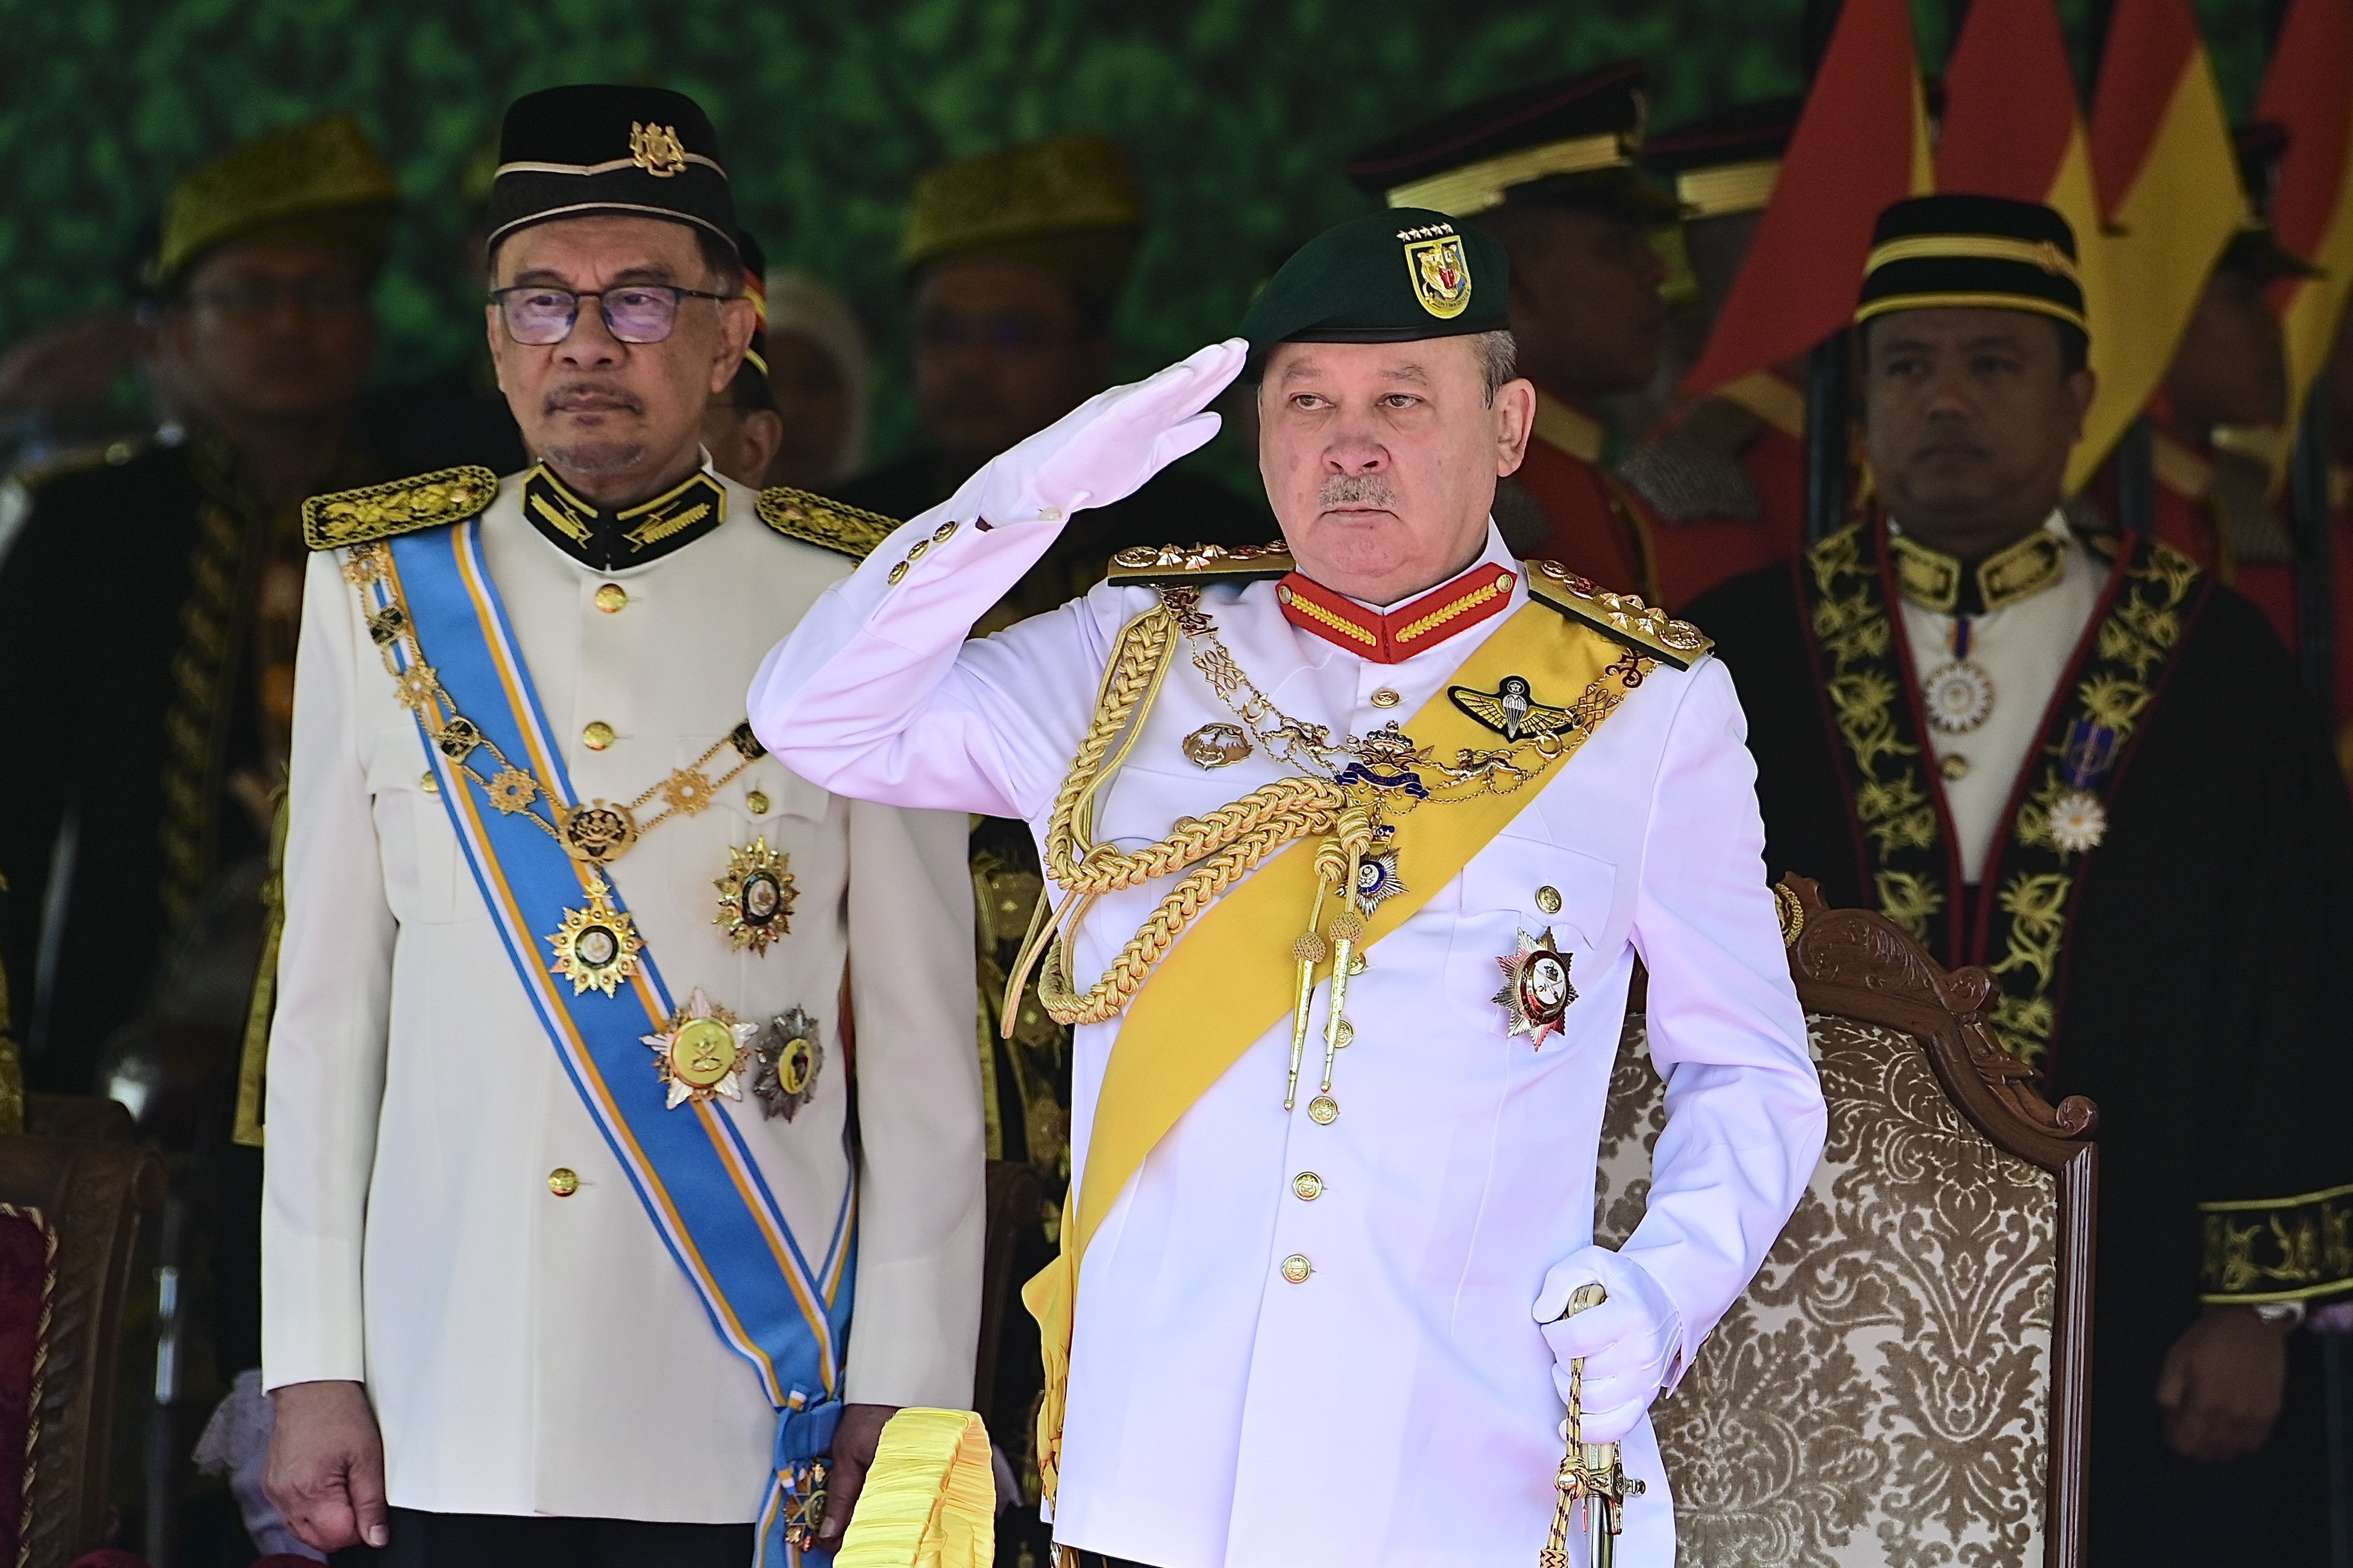 Malaysia’s king Sultan Ibrahim Sultan Iskandar (right) saluting as Malaysian PM Anwar Ibrahim (left) looks on during the opening of the third session of the 15th Parliament in Kuala Lumpur on February 26. Photo: EPA-EFE